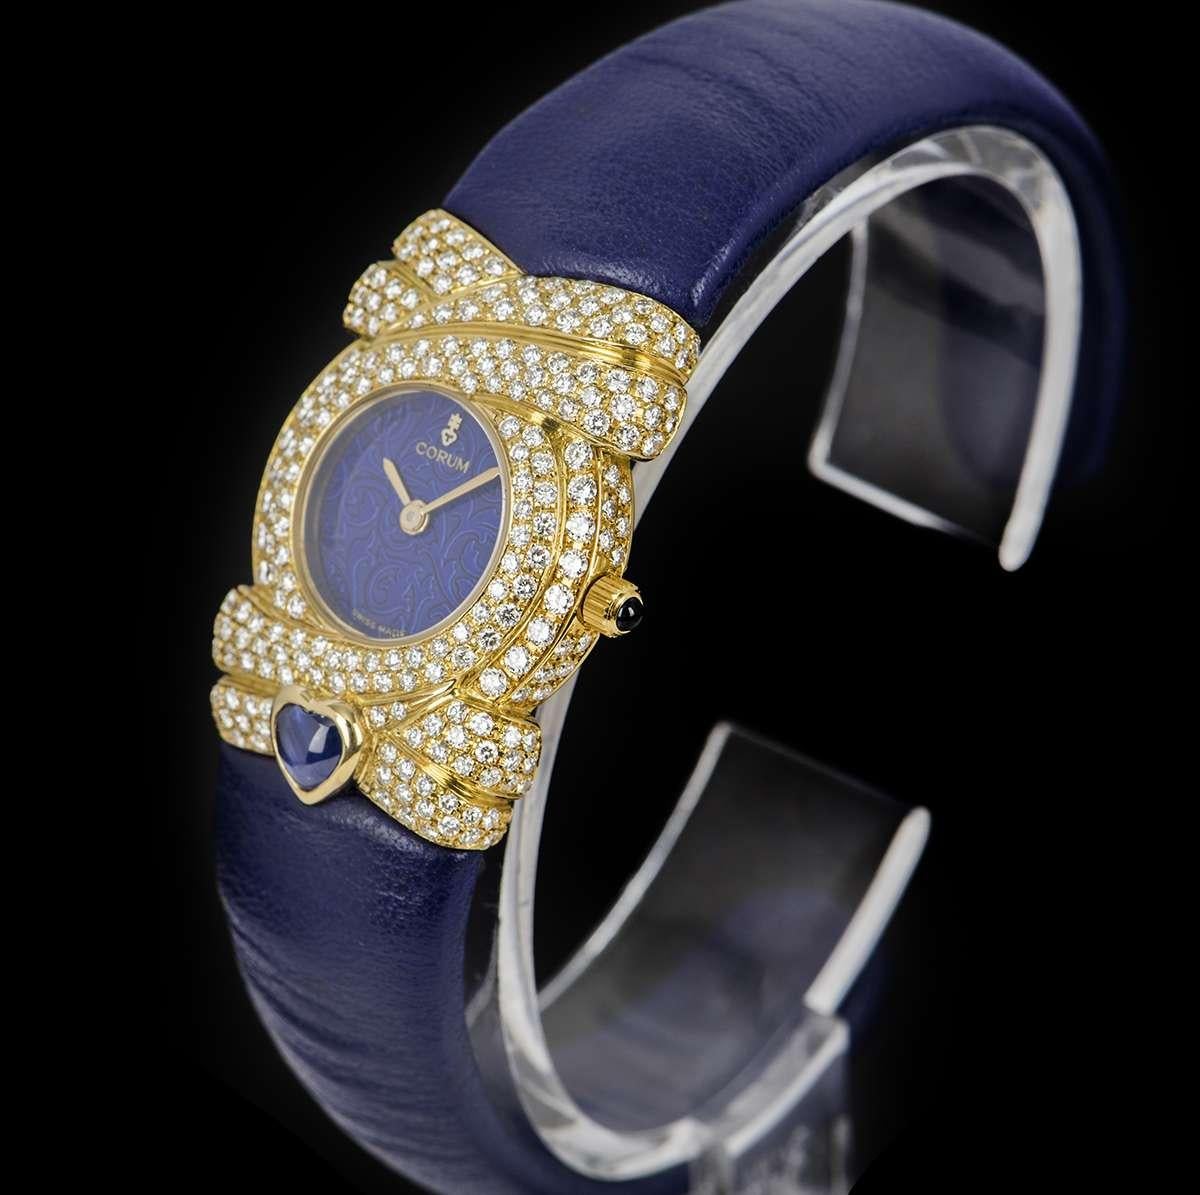 An Unworn 18k Yellow Gold Ladies NOS Dress 22mm Watch, blue dial with filigree design, 18k yellow gold bezel, lugs and case set with approximately 246 round brilliant cut diamonds (~1.86ct), an original blue leather cuff, sapphire glass, quartz